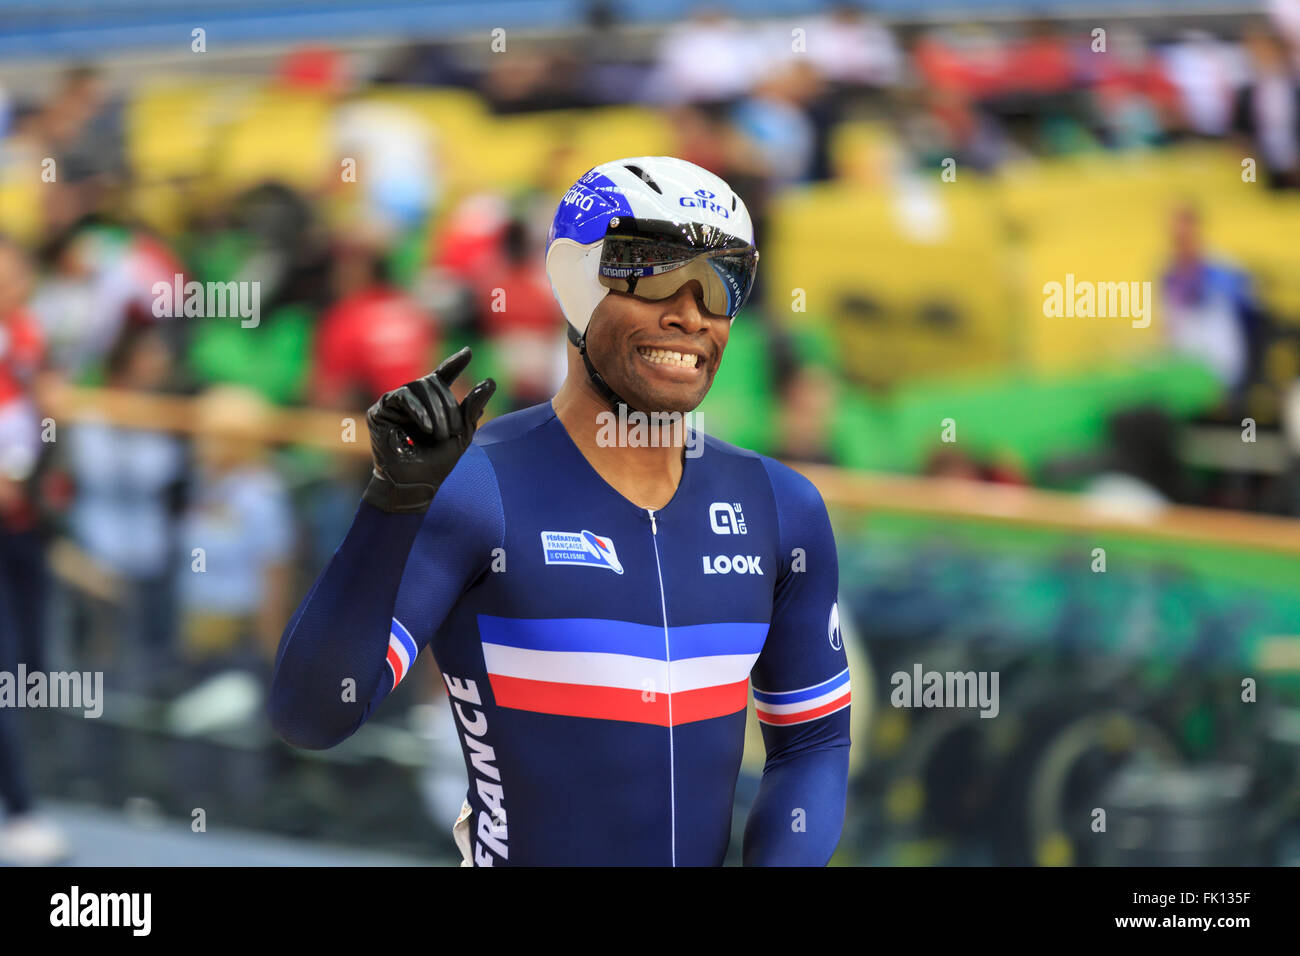 London, UK, 4 March 2016. UCI 2016 Track Cycling World Championships. Reigning Men's Individual Sprint World Champion Gregory Bauge (France) beat Canada's Hugo Barbette by 0.011s in the 1/16 finals and shows the crowd how far that margin is in real terms. Credit:  Clive Jones/Alamy Live News Stock Photo